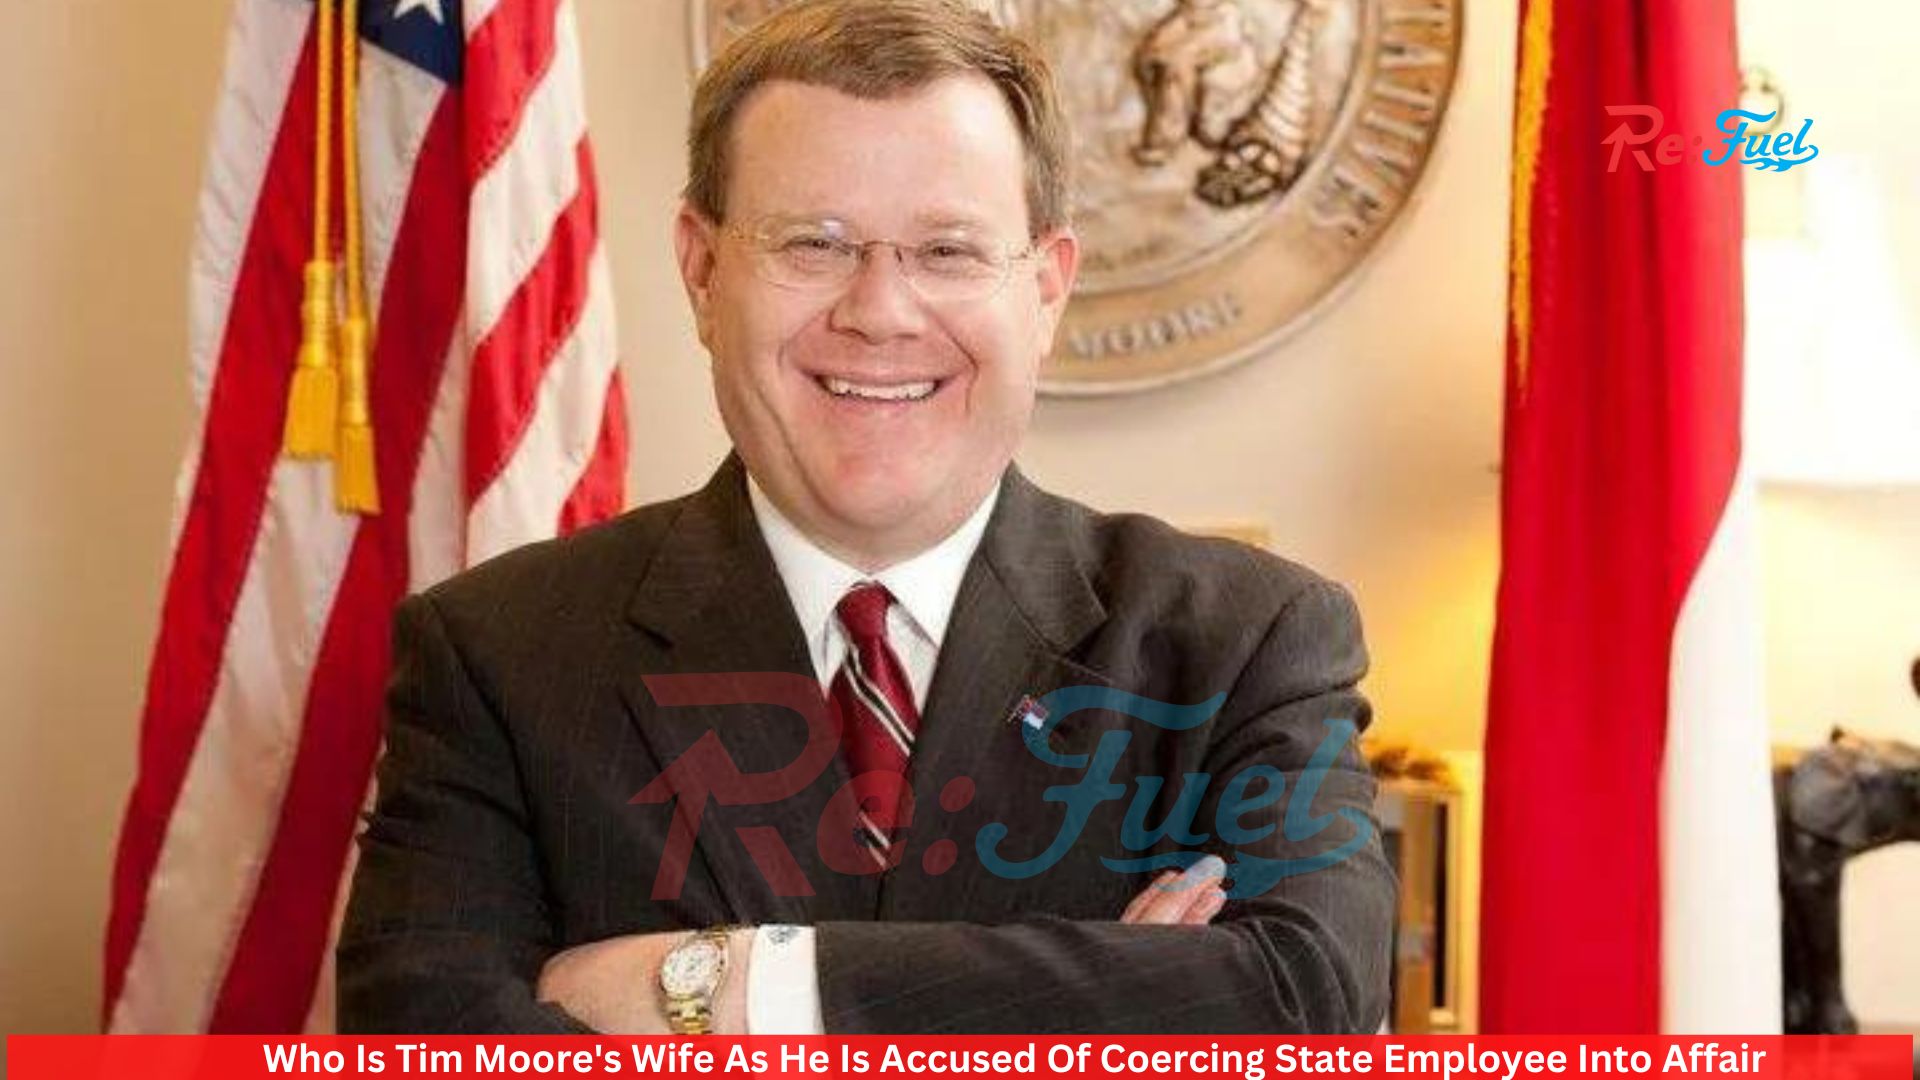 Who Is Tim Moore's Wife As He Is Accused Of Coercing State Employee Into Affair